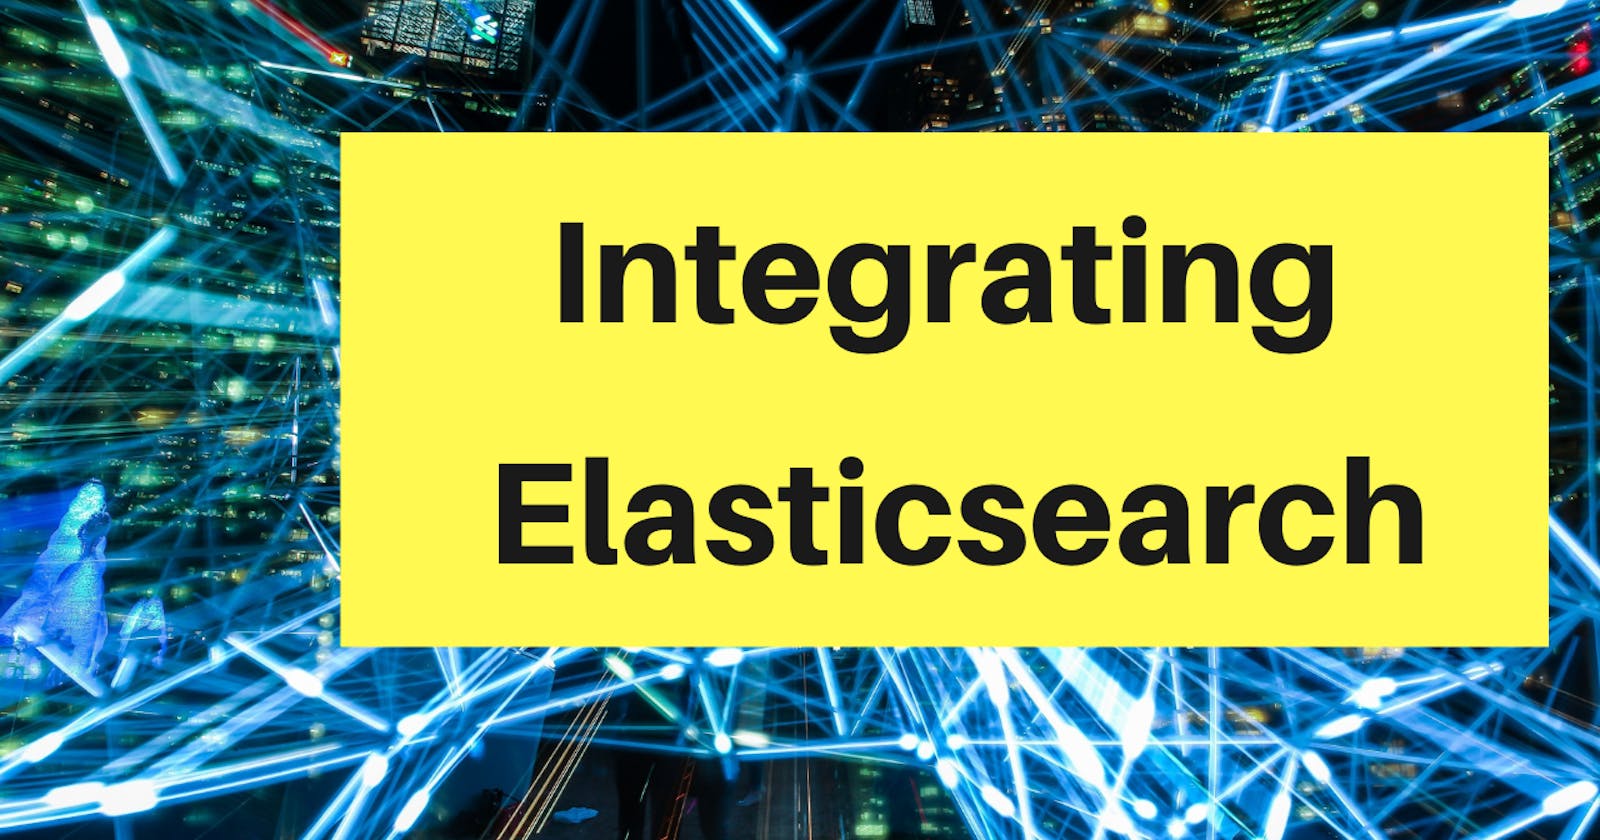 Getting search results faster with Elasticsearch